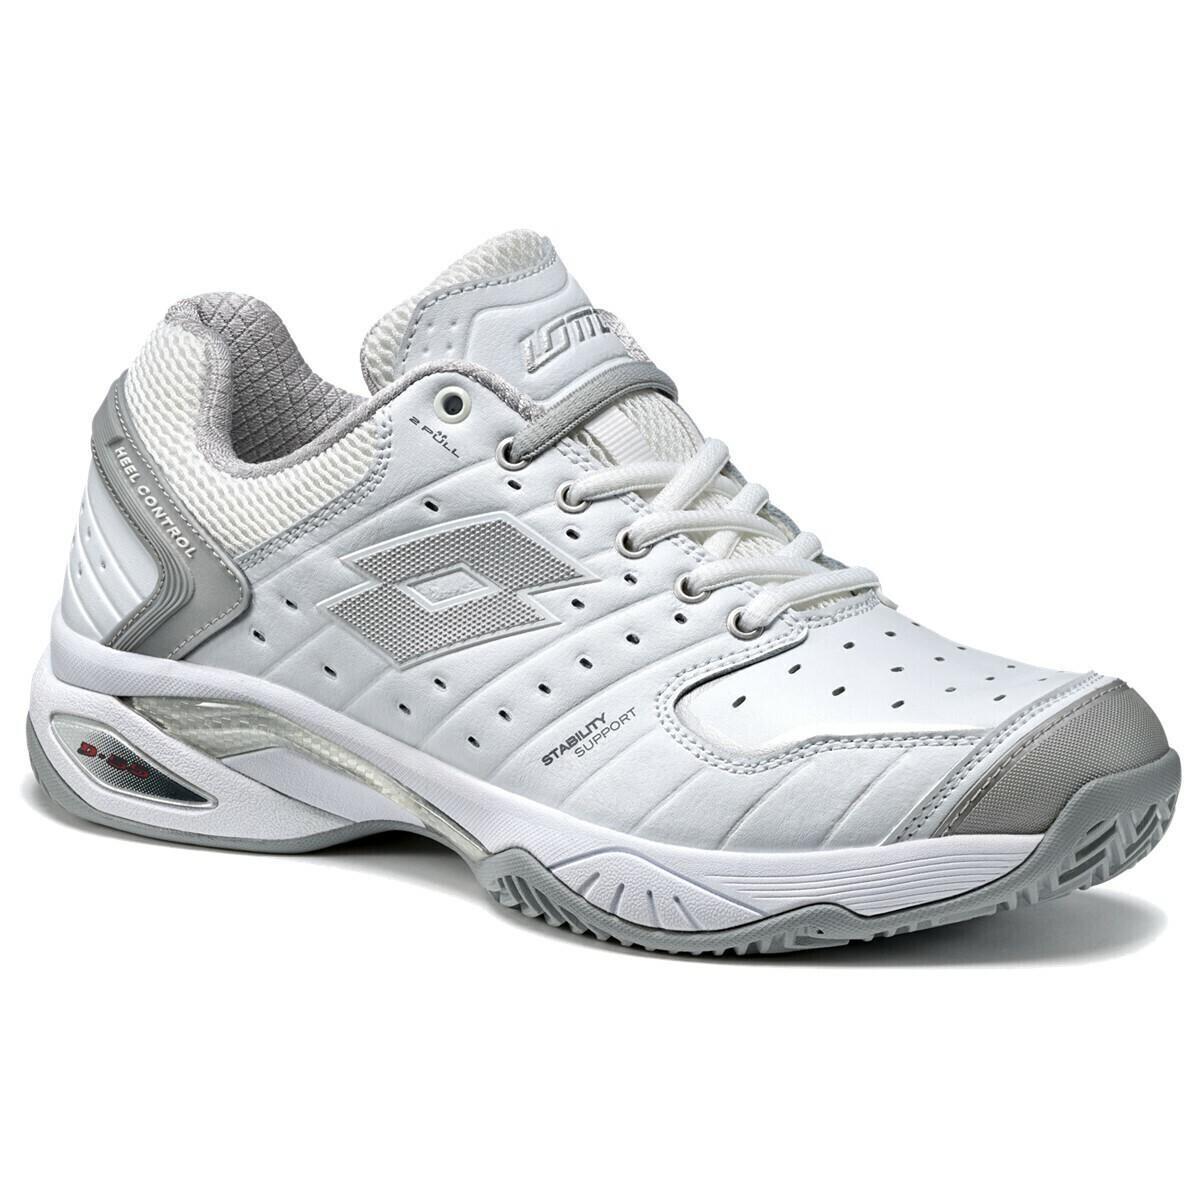 Lotto Womens Raptor Clay Leather Tennis Shoes En Tout Cas - White/Grey/Silver - US 7